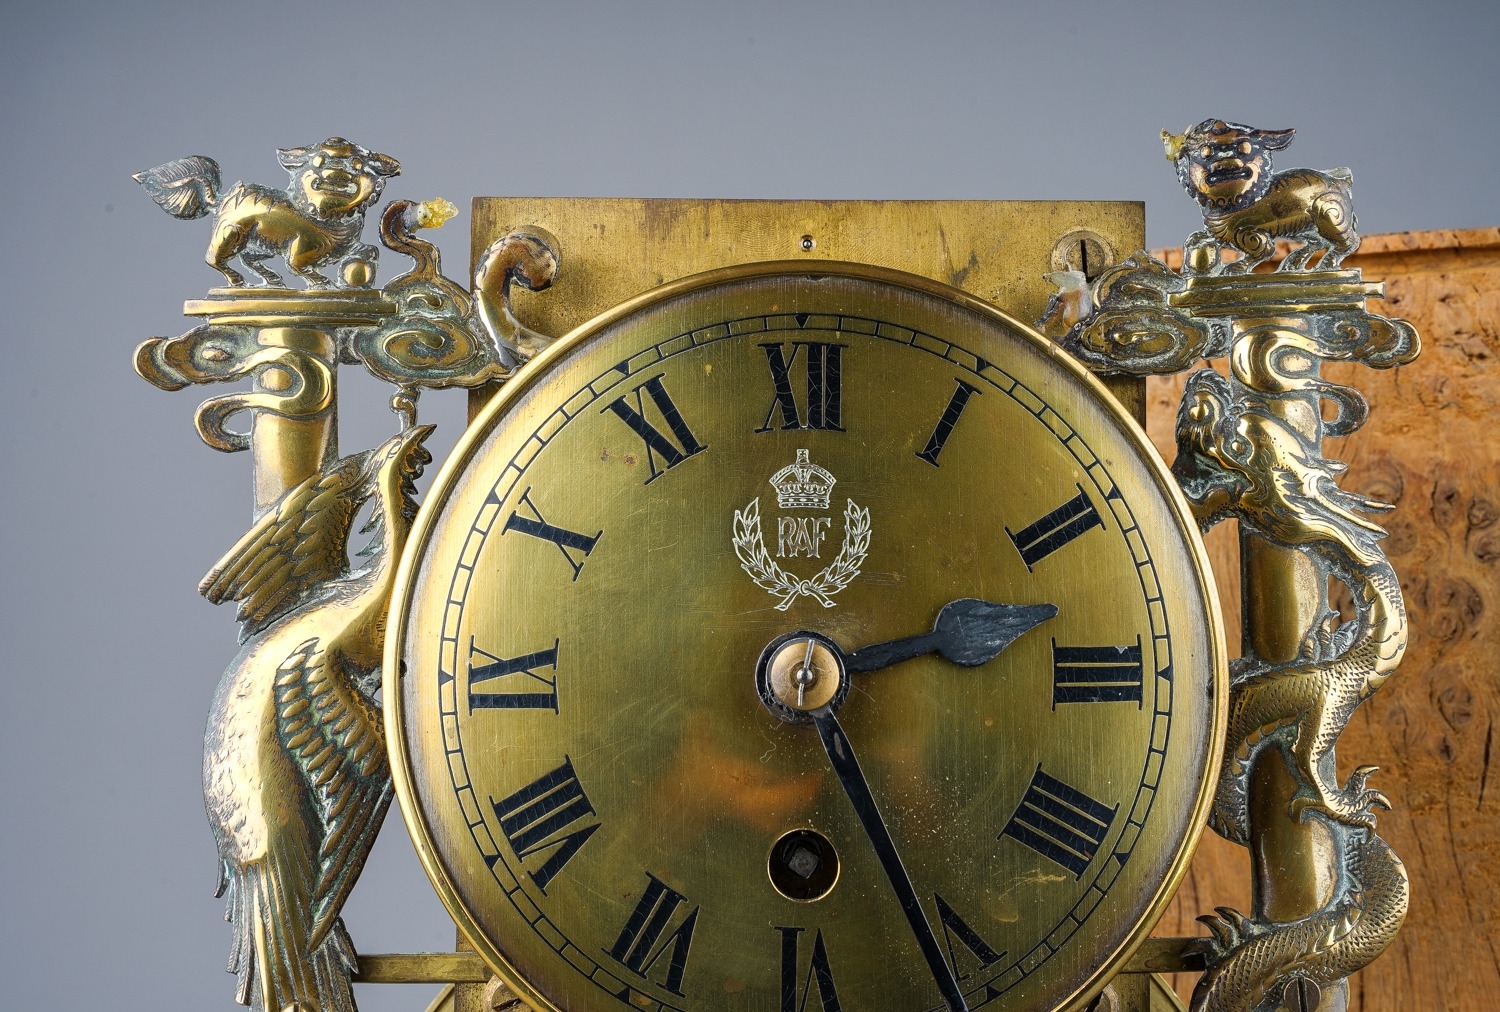 Unique British RAF Presentation clock in bronze, decorated with Peacocks and Lions. Missing the case - Image 2 of 5